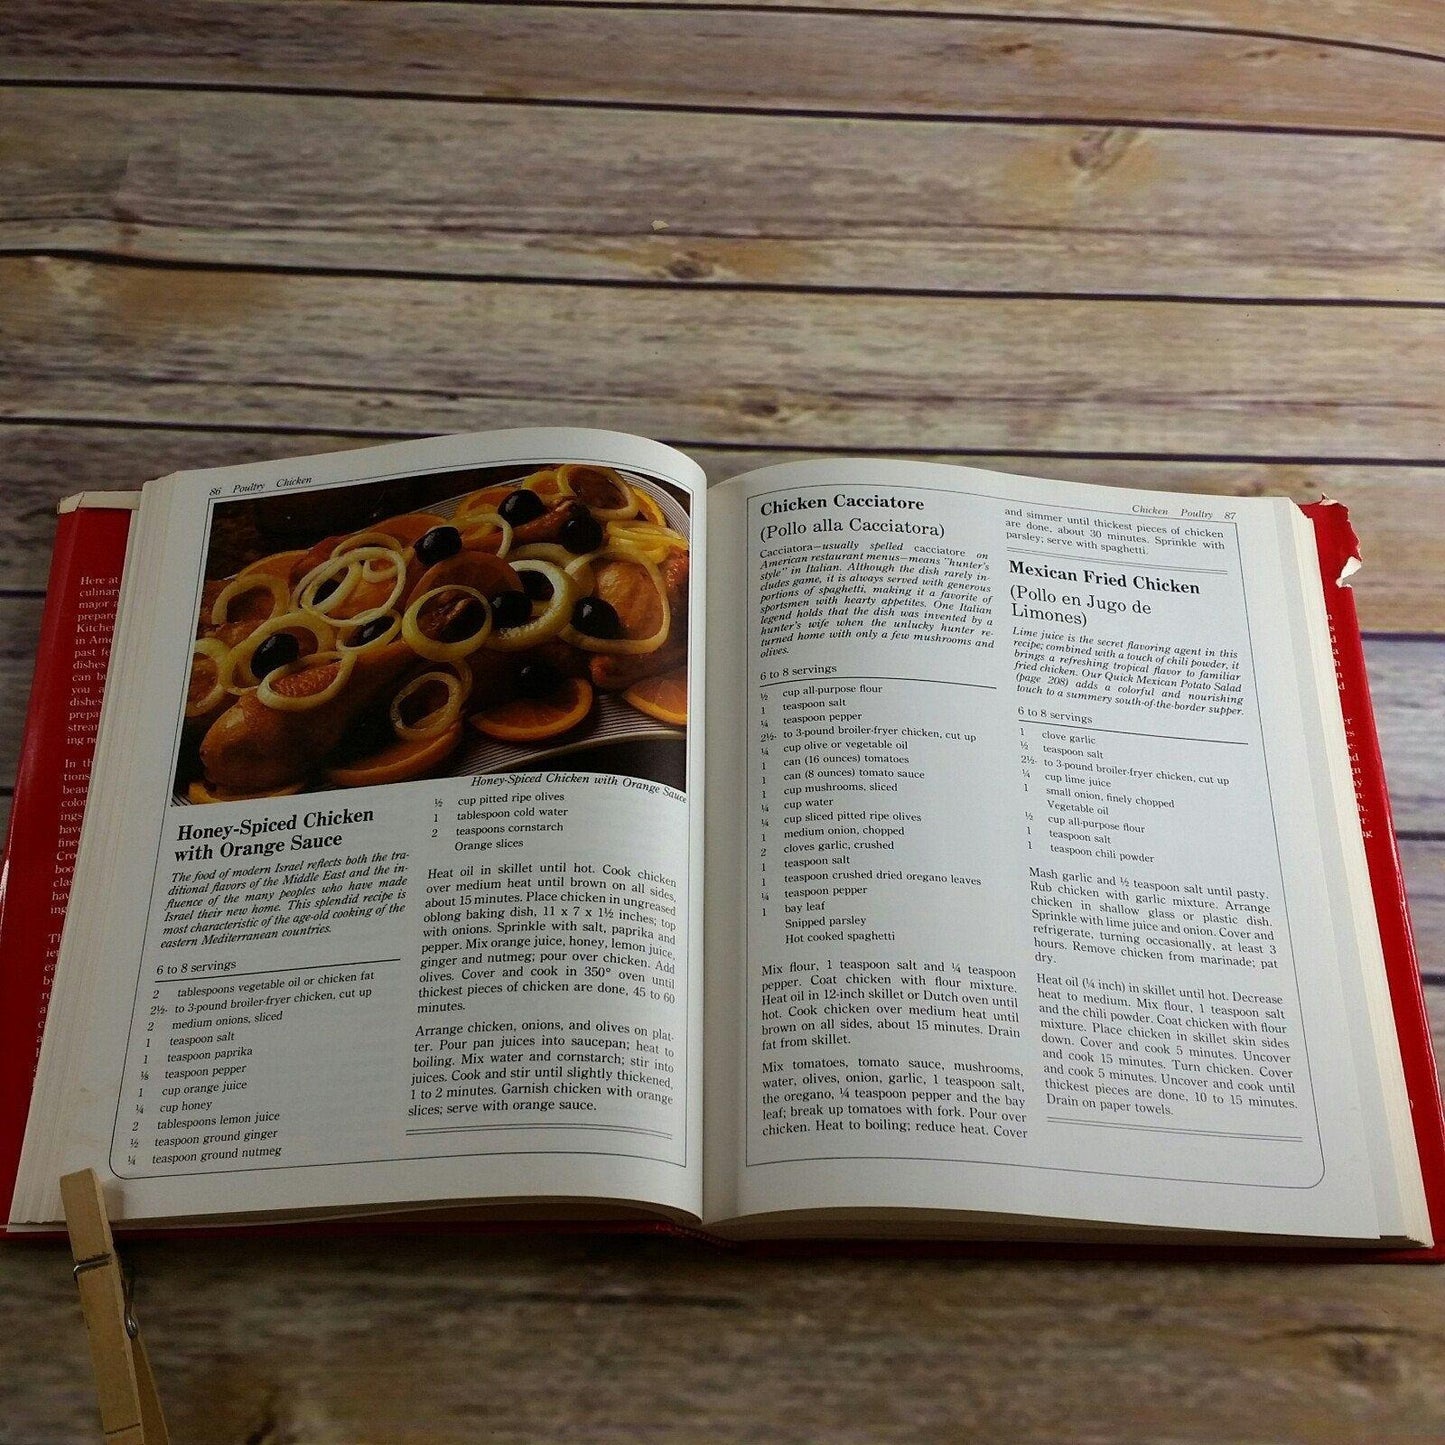 Vintage Cookbook Betty Crocker International Cookbook Recipes 1980 Hardcover Starters Seafood Poultry Meats First Edition